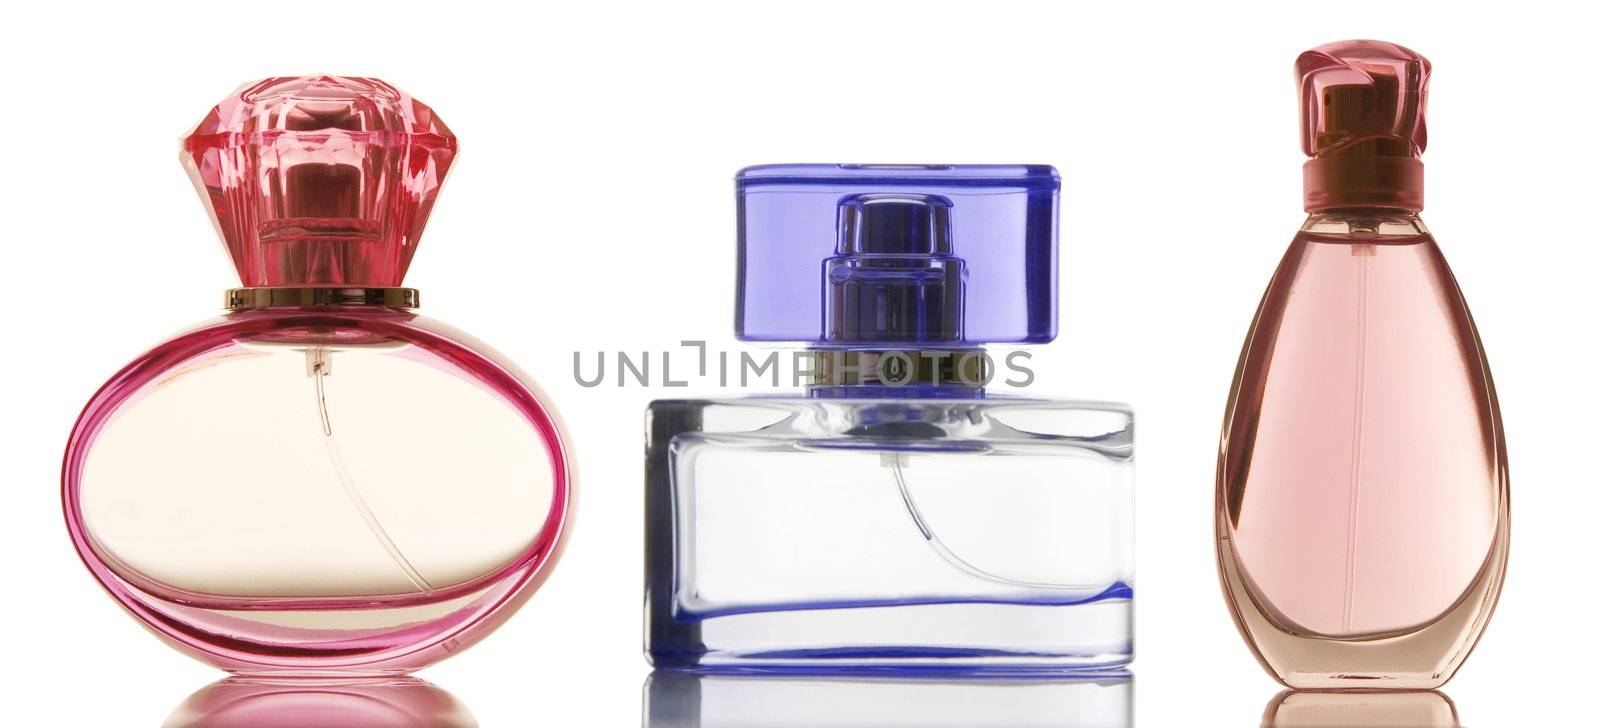 Perfume in a glass bottles on white background